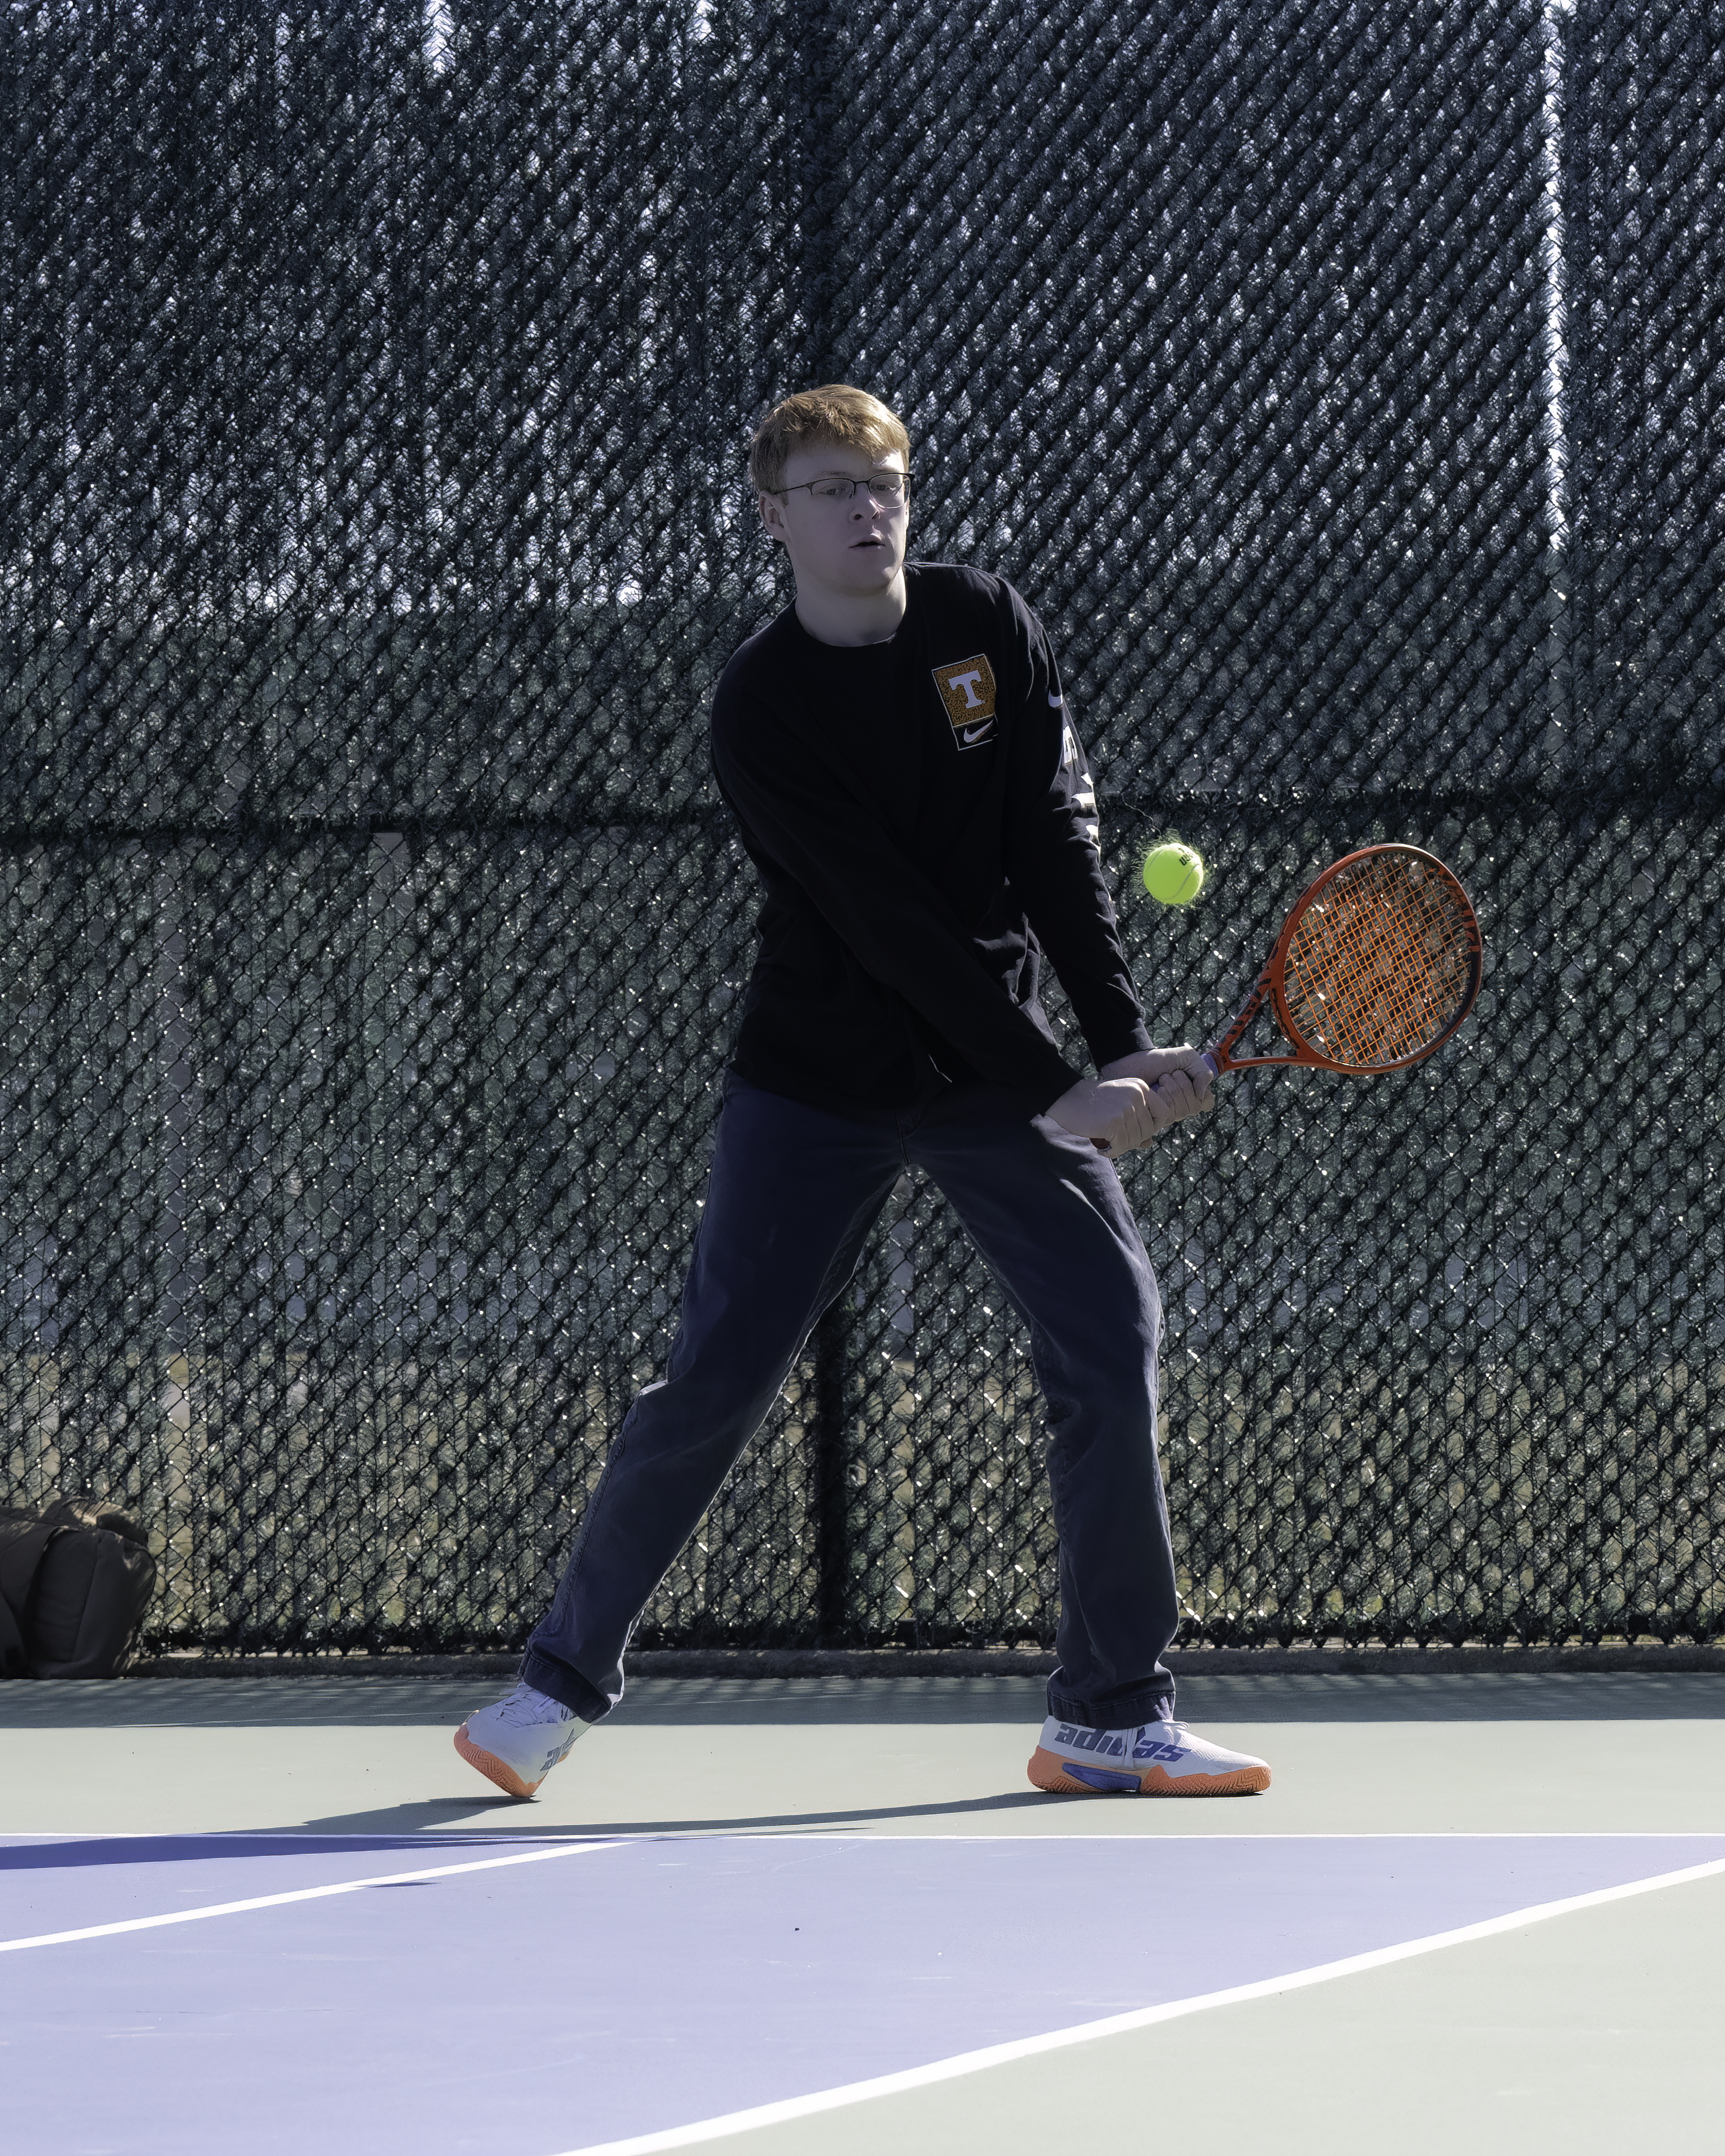 East Hampton junior Cameron Mitchell, along with classmate Miguel Garcia, finished third in the Division IV doubles draw last year. MARIANNE BARNETT